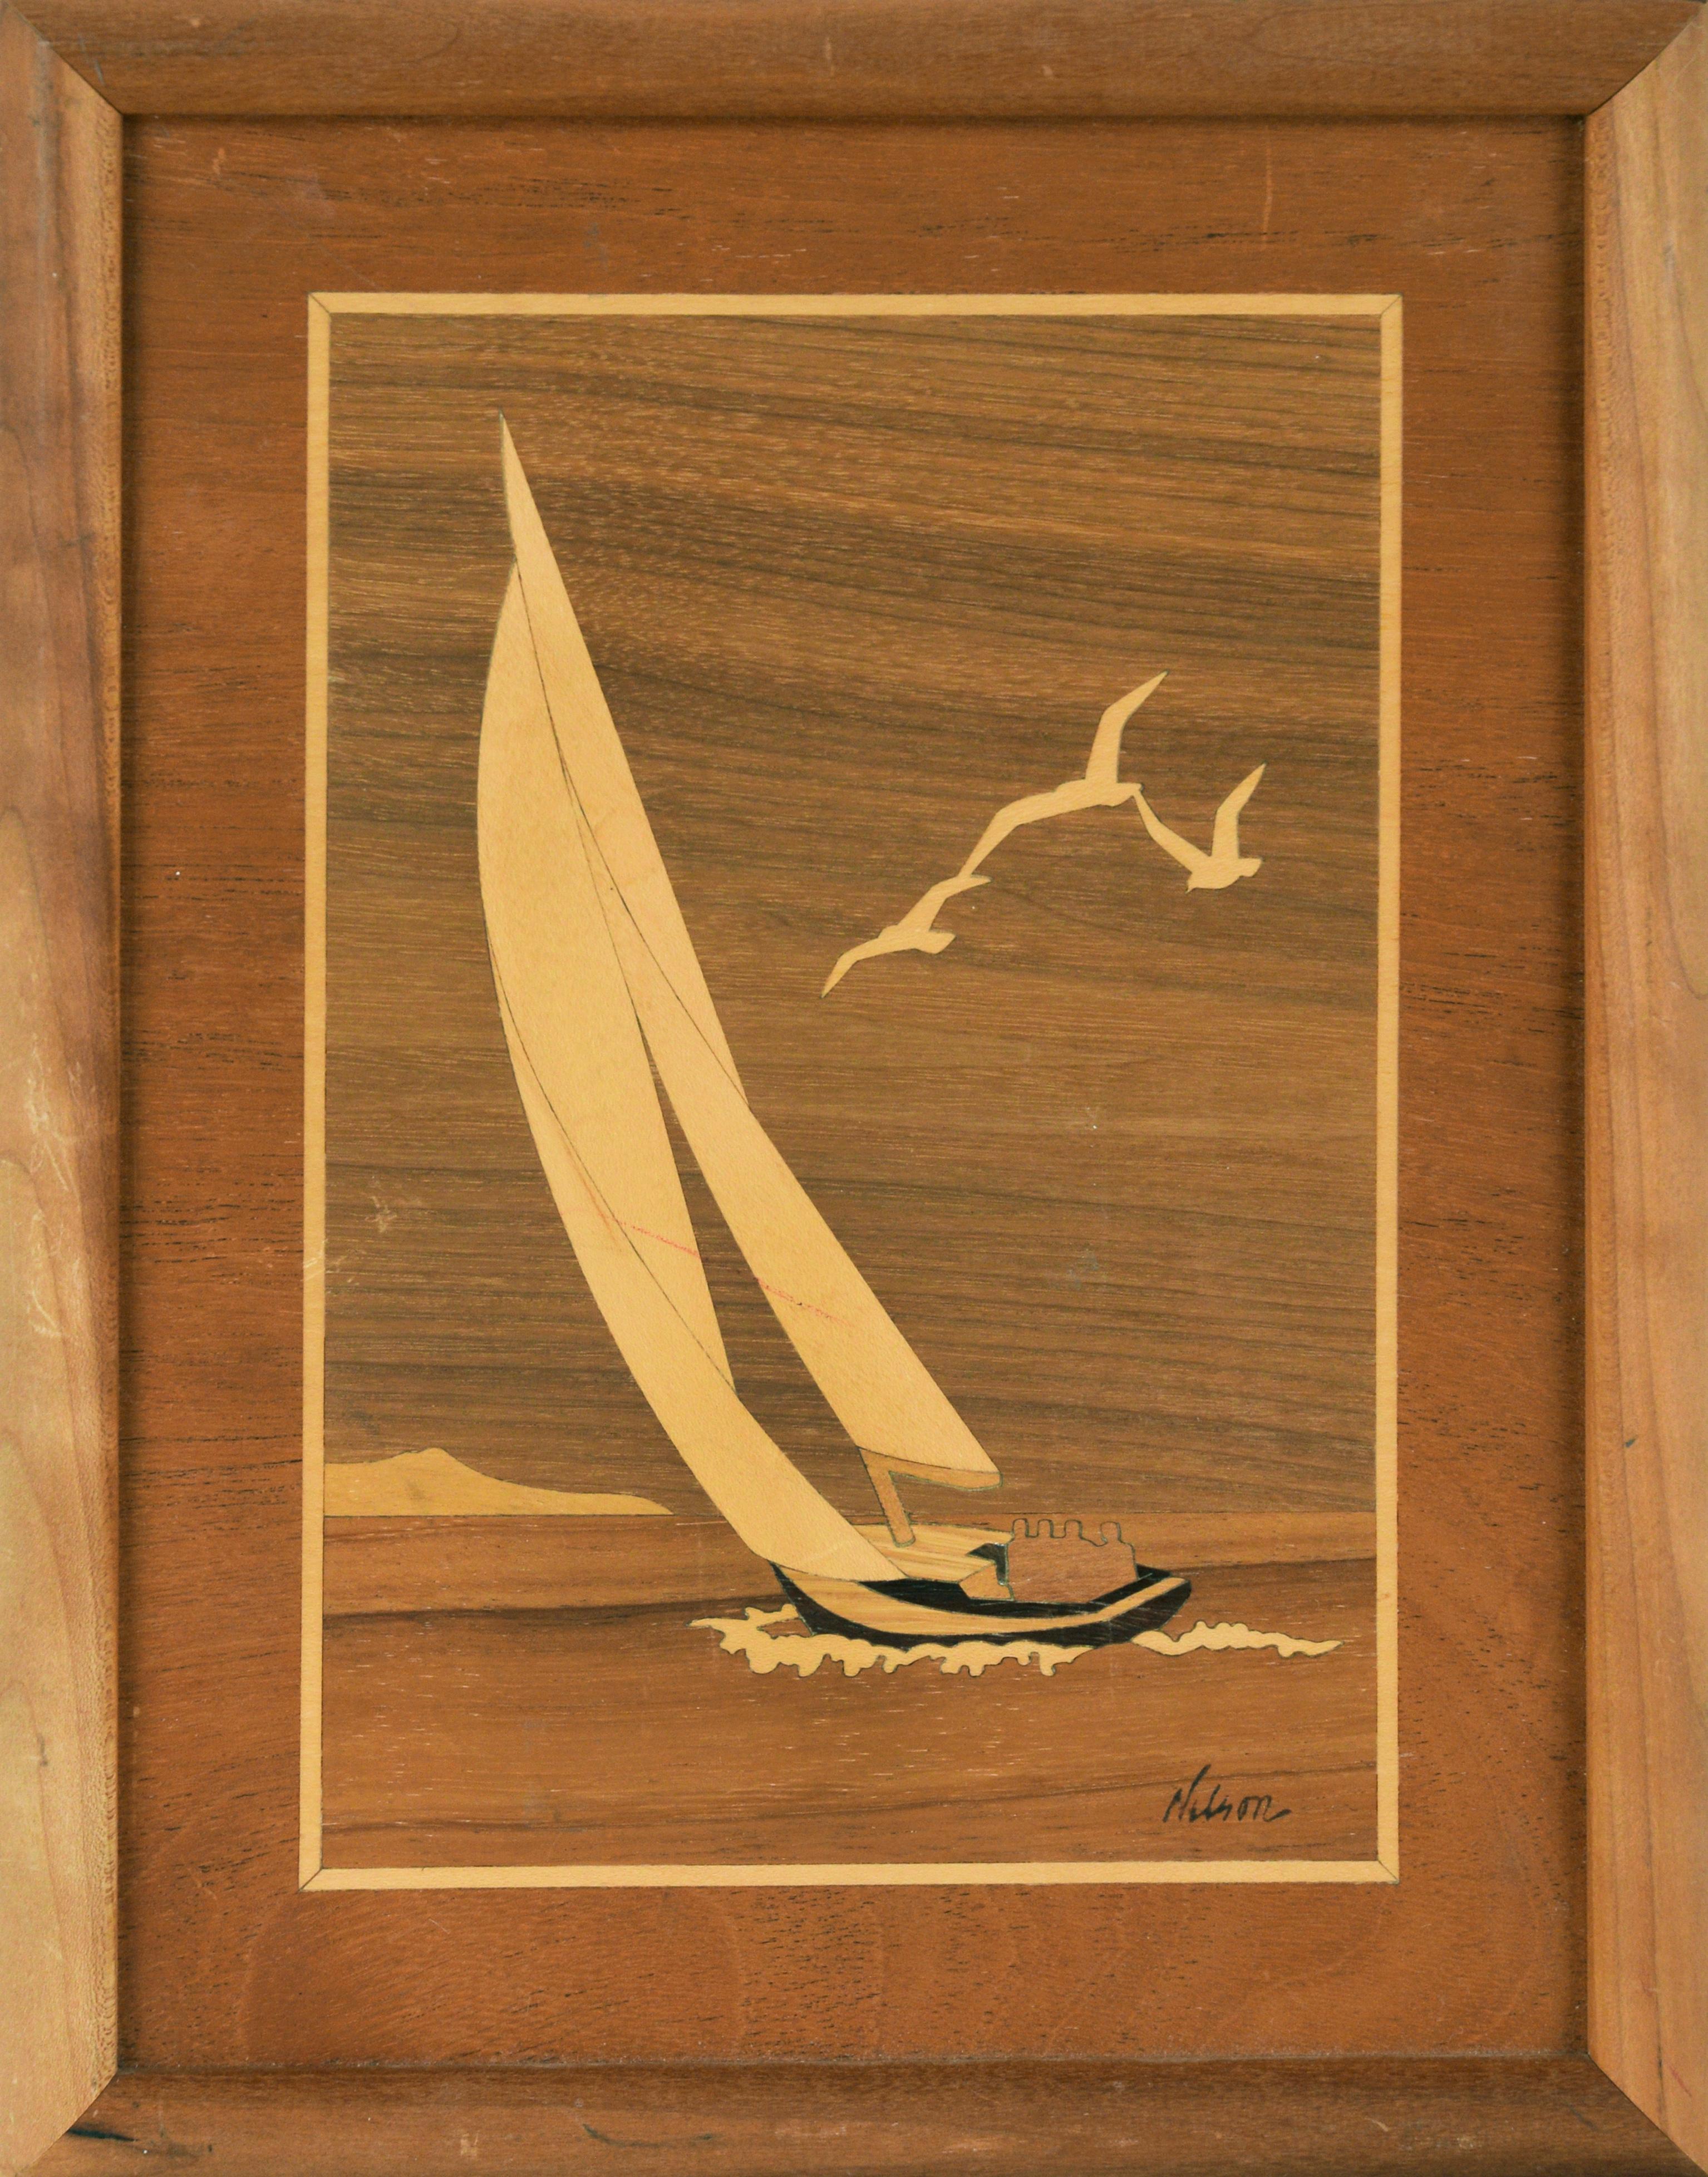 Sailboat Out At Sea - Landscape Scene by Jeffrey Nelson

Hudson River Inlay Landscape Scene by Jeffrey Nelson (American, b. 1959-). A sailboat sails across the sea as three birds fly above. The sail and birds are made of light wood, while the boat